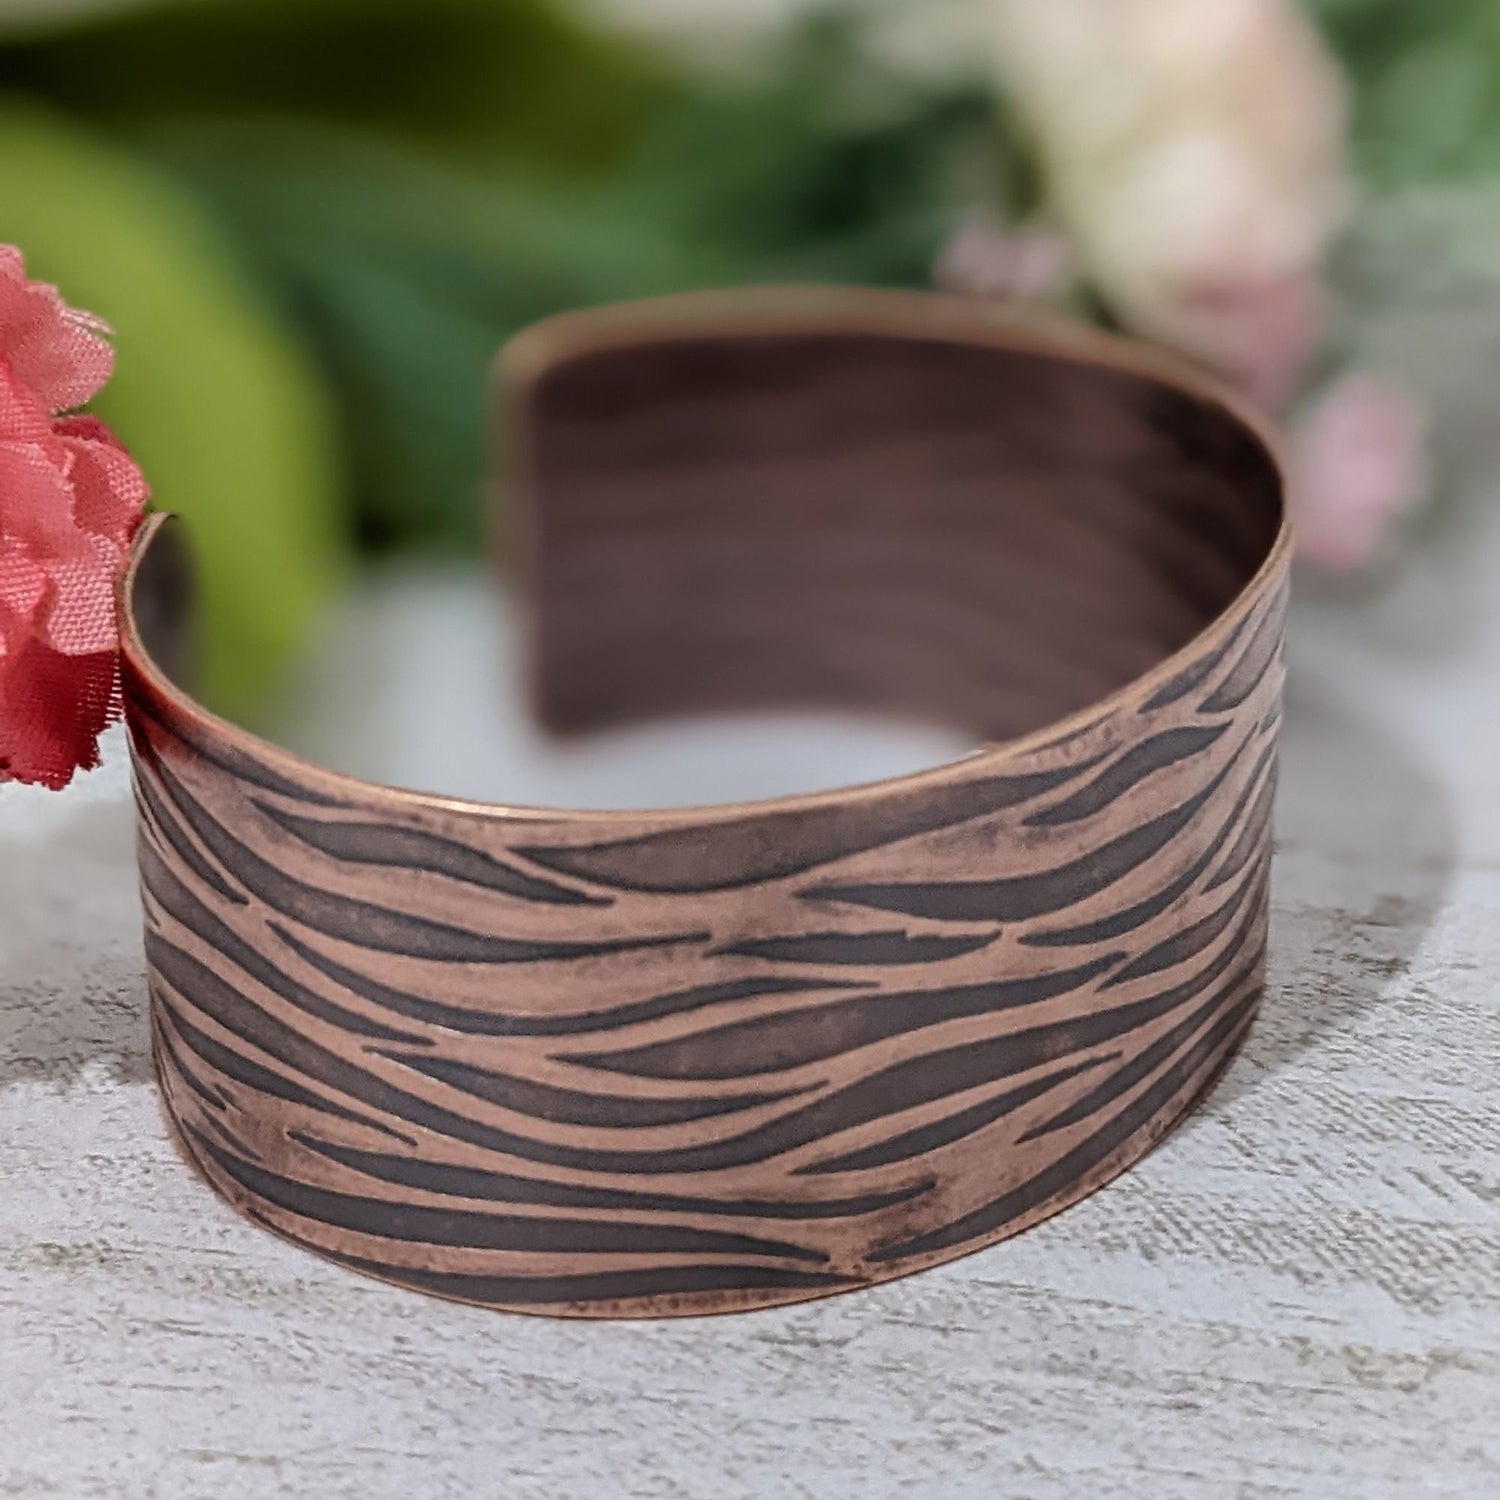 copper cuff bracelet with impressed design that looks like gently rippling water surface